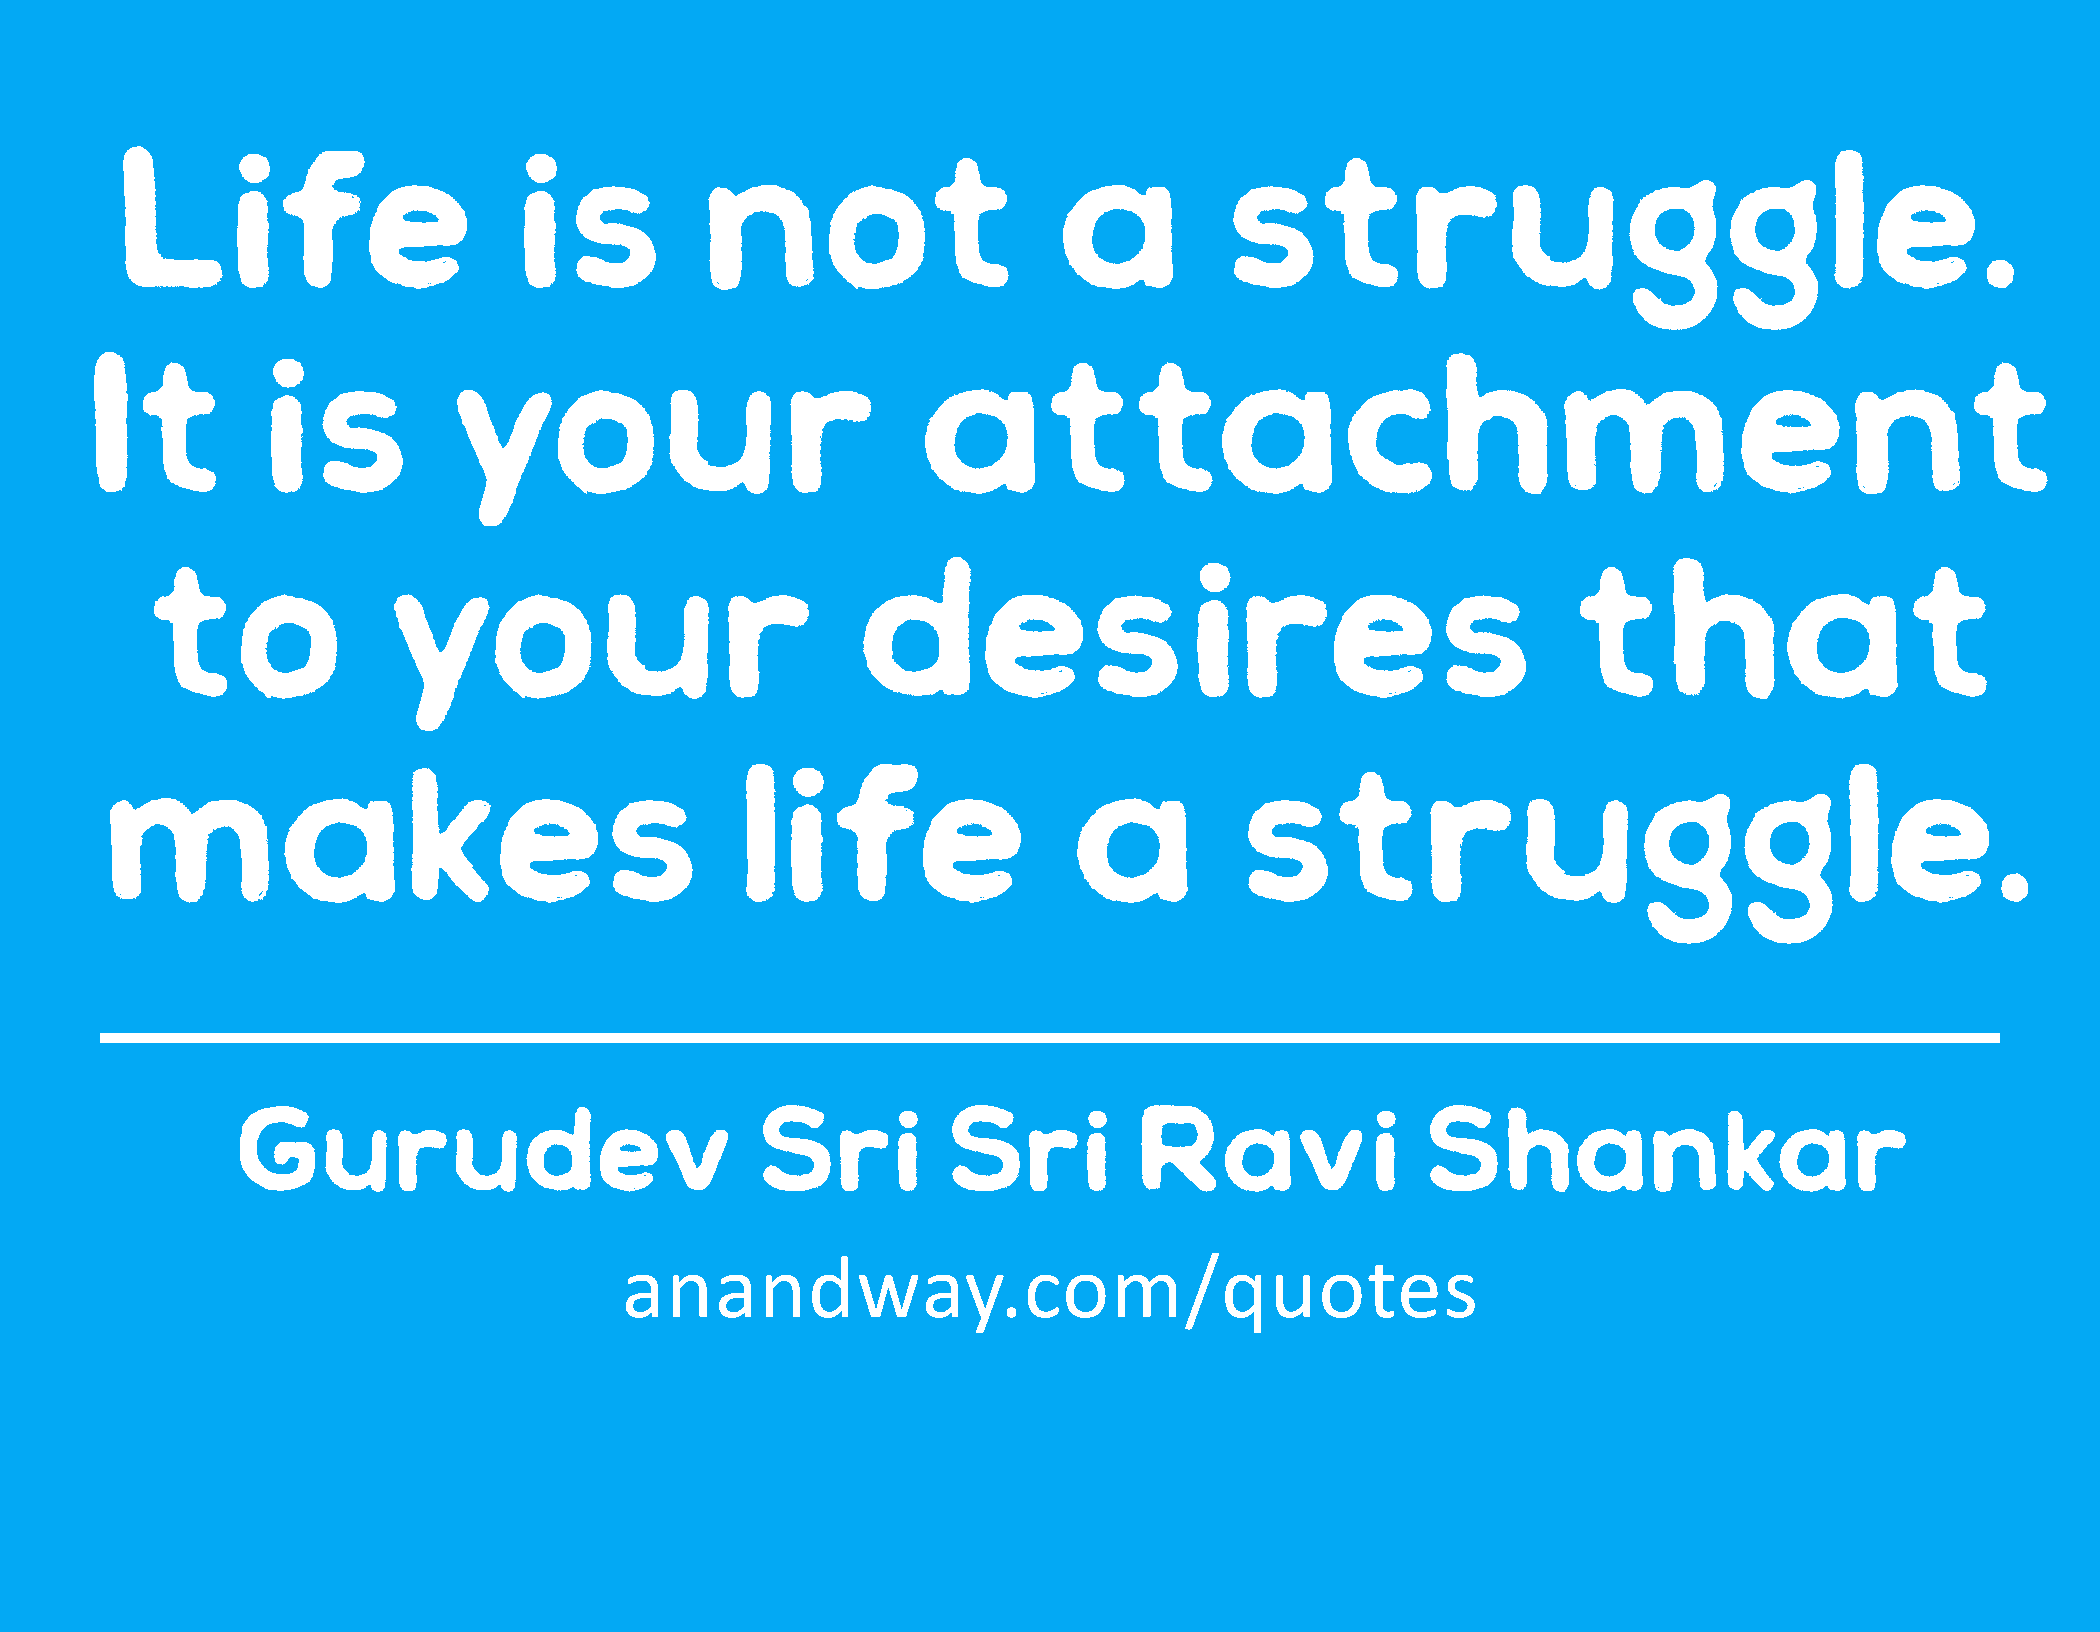 Life is not a struggle. It is your attachment to your desires that makes life a struggle. 
 -Gurudev Sri Sri Ravi Shankar